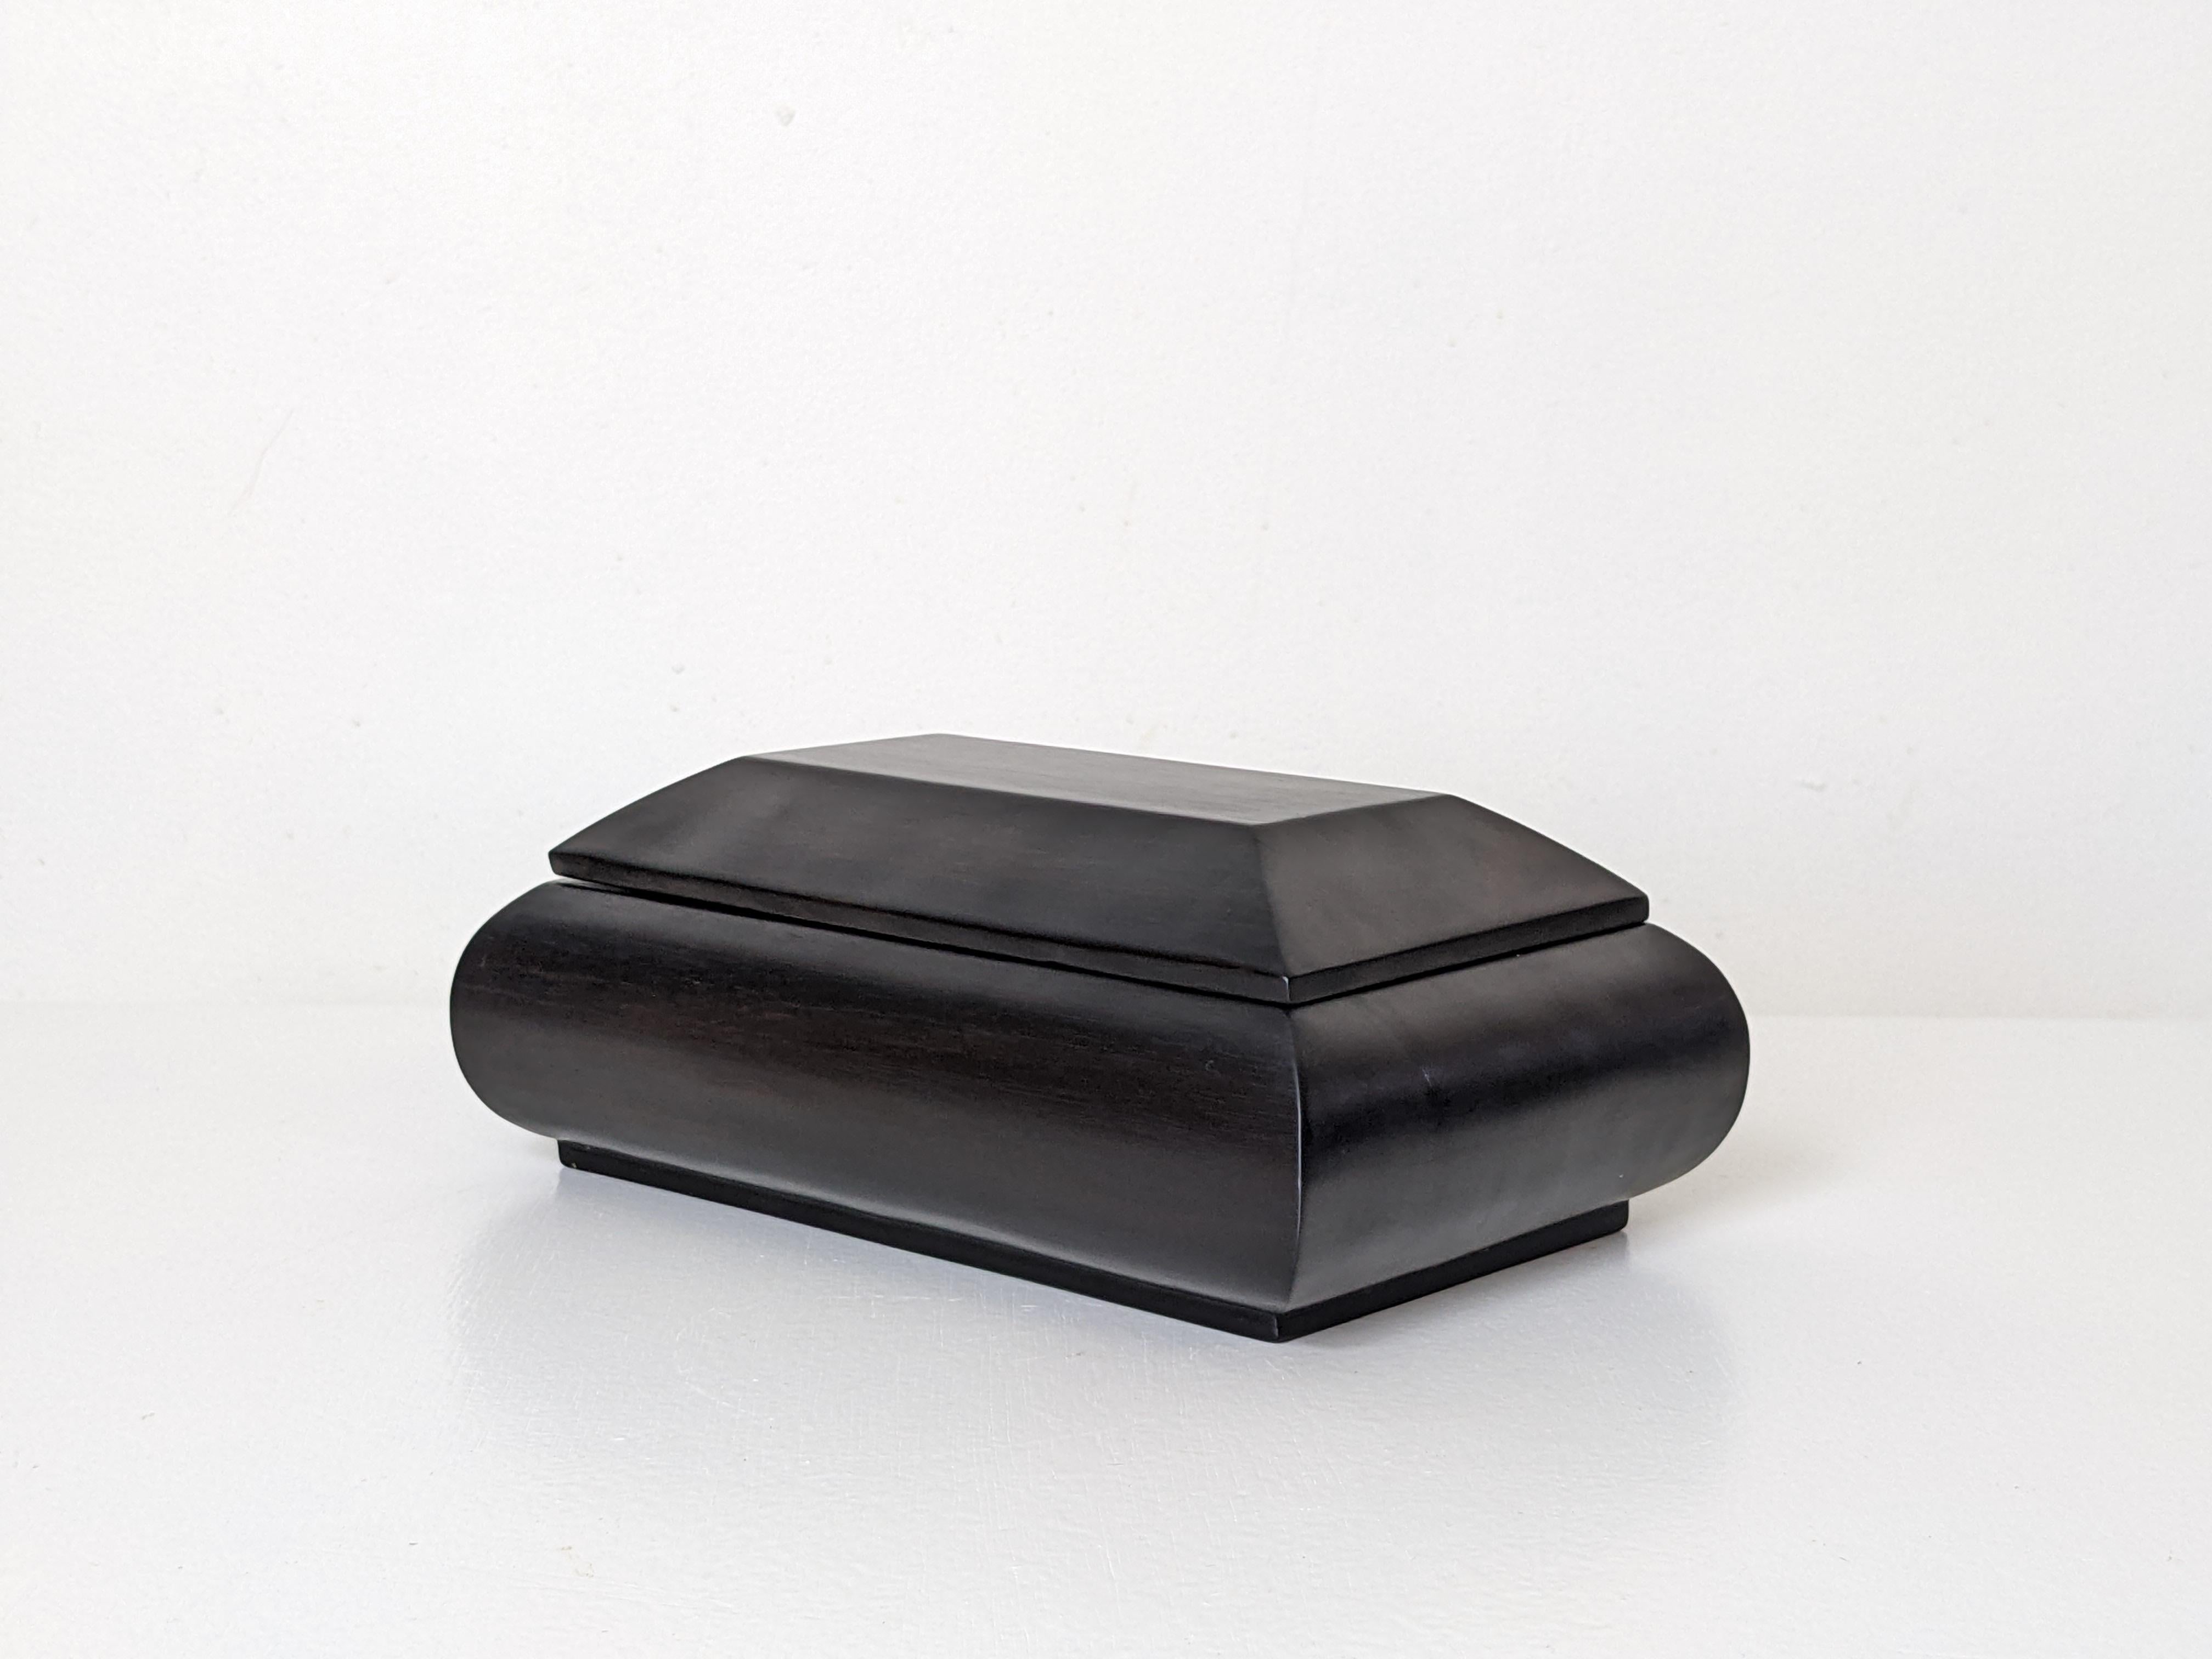 Mid-20th Century Art Deco Decorative Lidded Box in Solid Ebony Wood, France 1930s, 2 Available